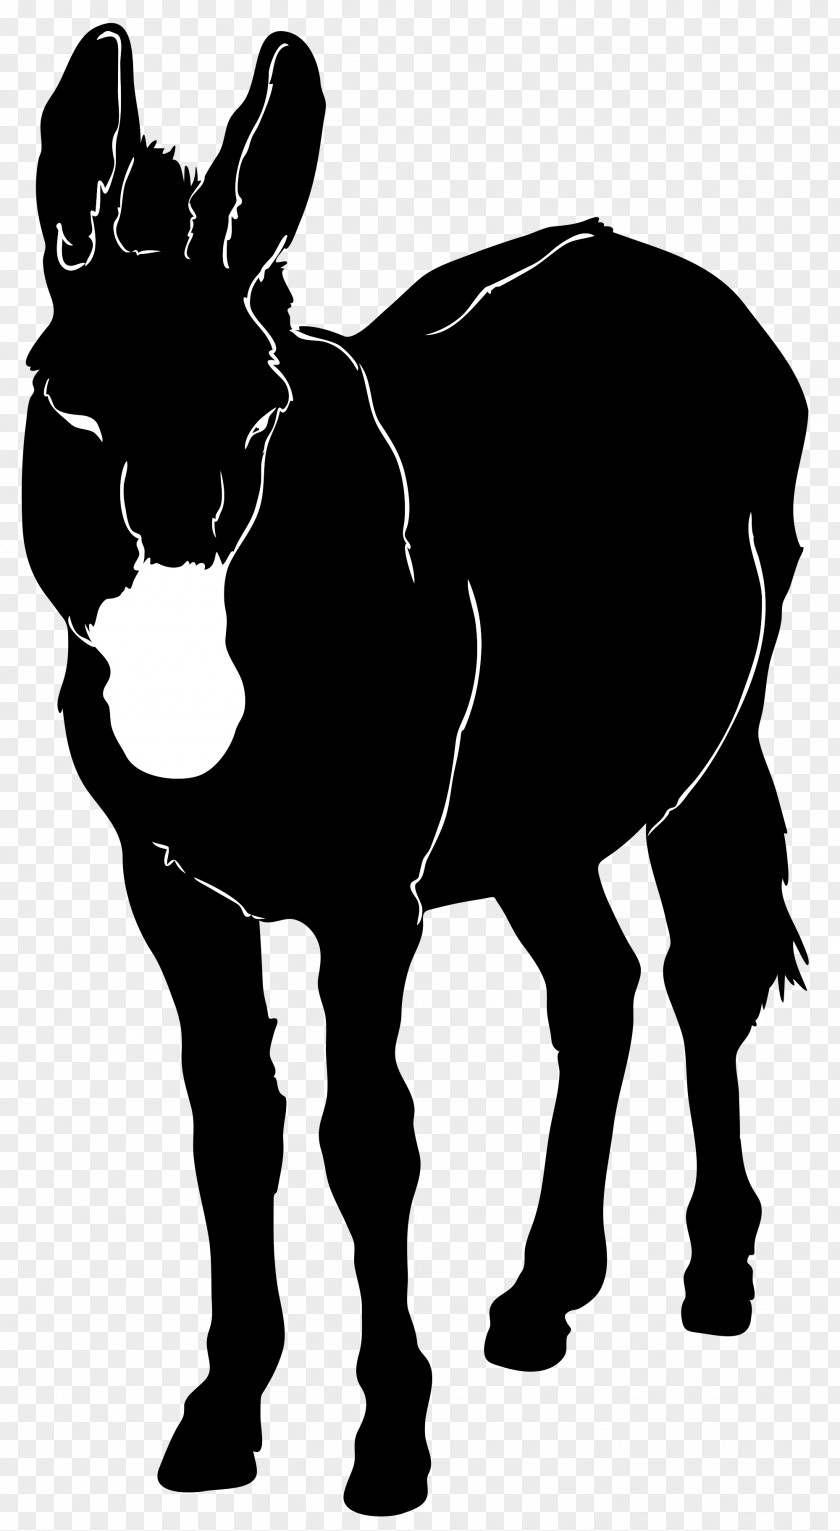 Donkey Silhouette Clip Art PNG